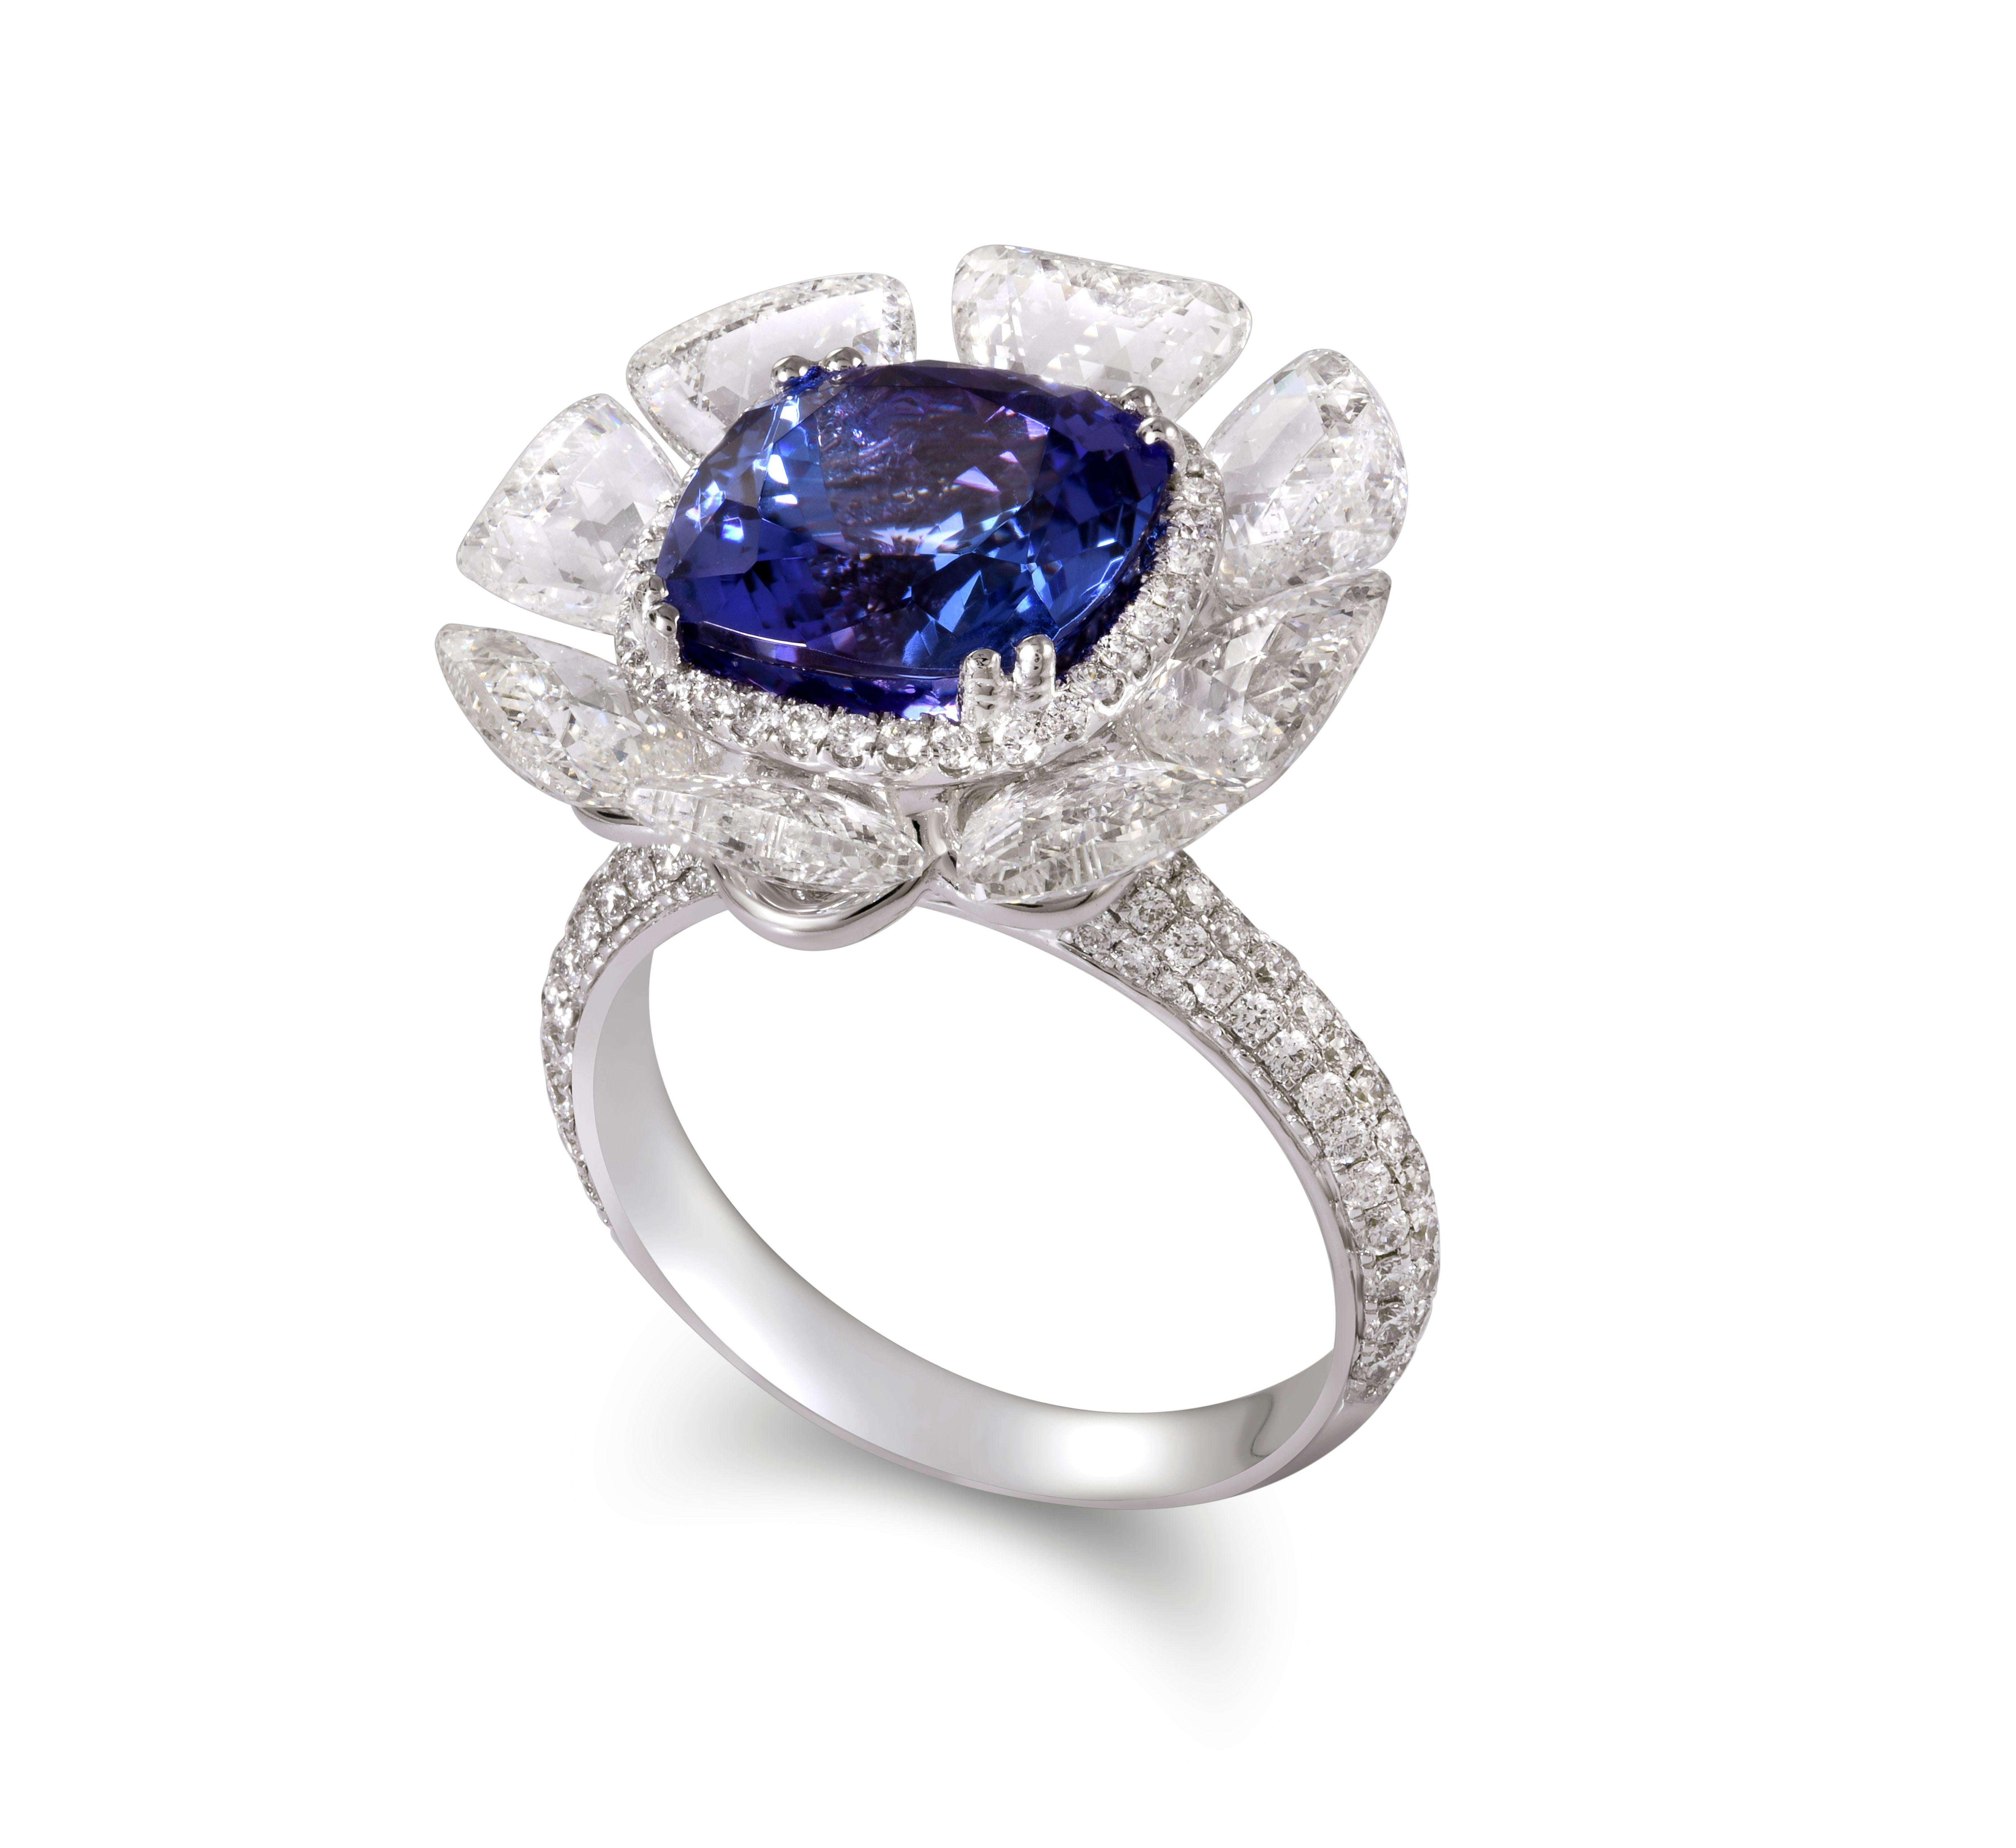 This vibrant ring is a perfect example of Rarever's artistry. The vivid purplish-blue 5.29ct tanzanite is framed by a halo of striking Tawiz cut diamonds that have a gentle movement to them. The minimal use of metal accentuates the natural fire in